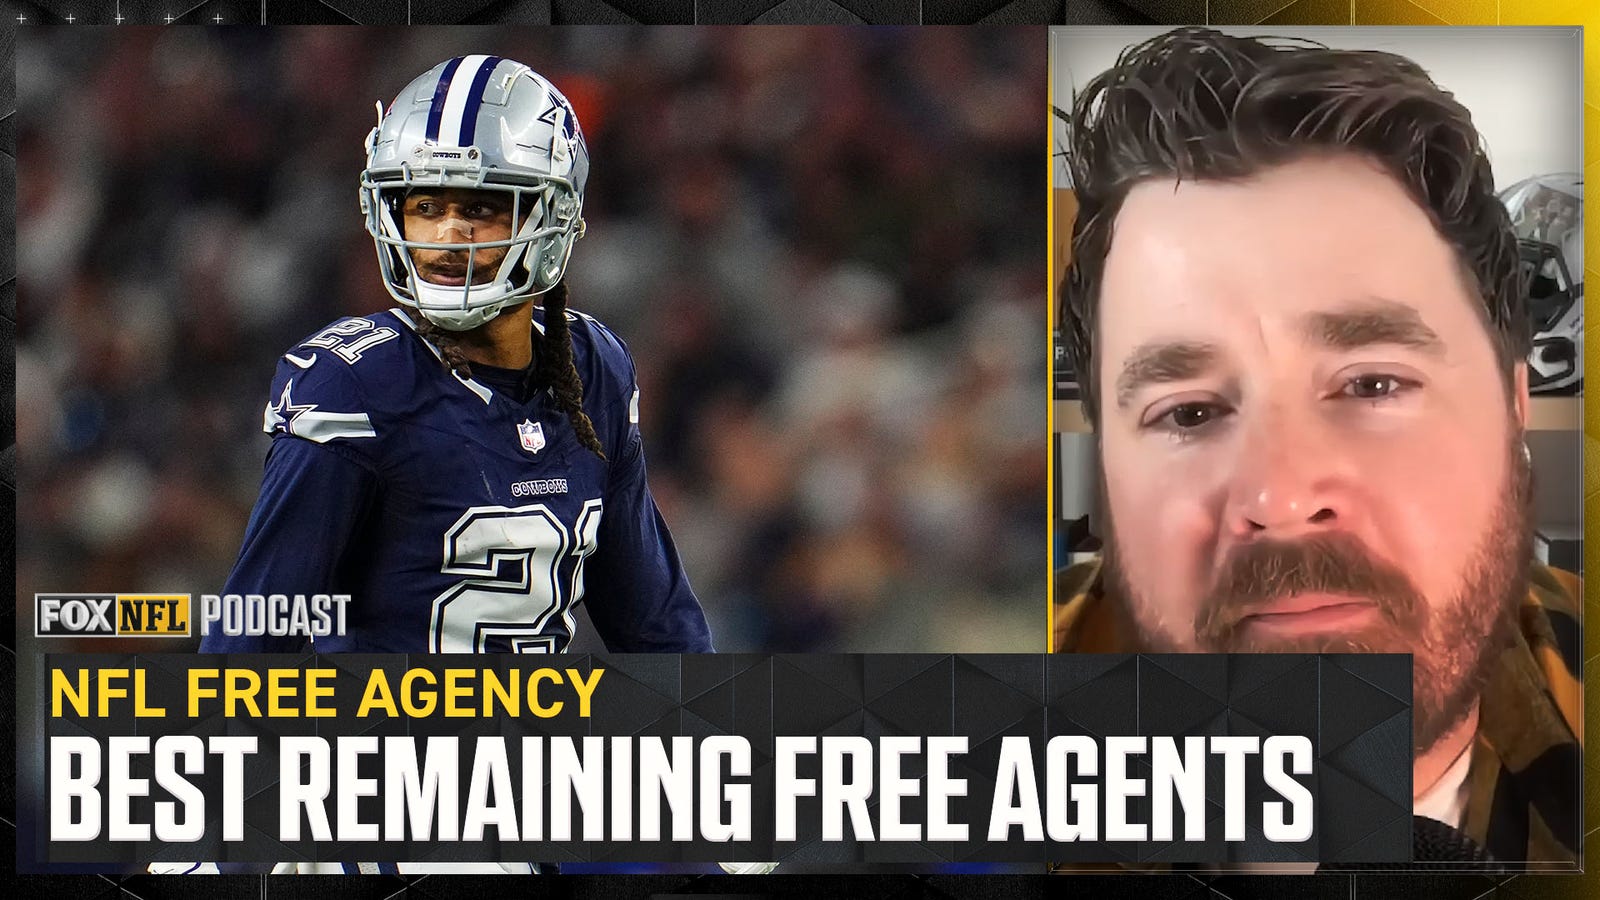 Best remaining NFL free agents (w/Gregg Rosenthal)